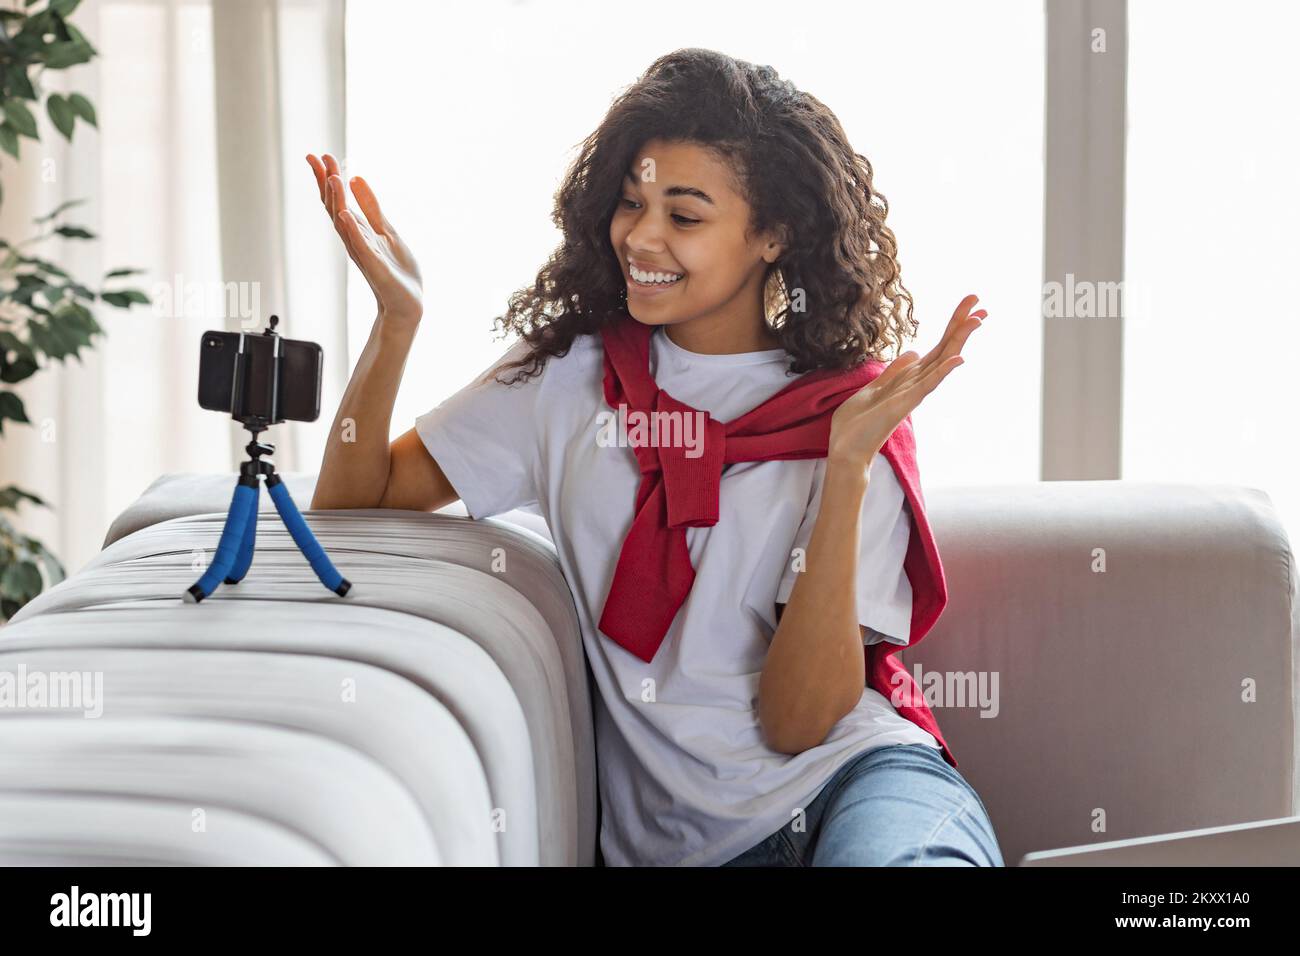 Young attractive African American woman blogger or vlogger looking at camera and talking to followers Stock Photo